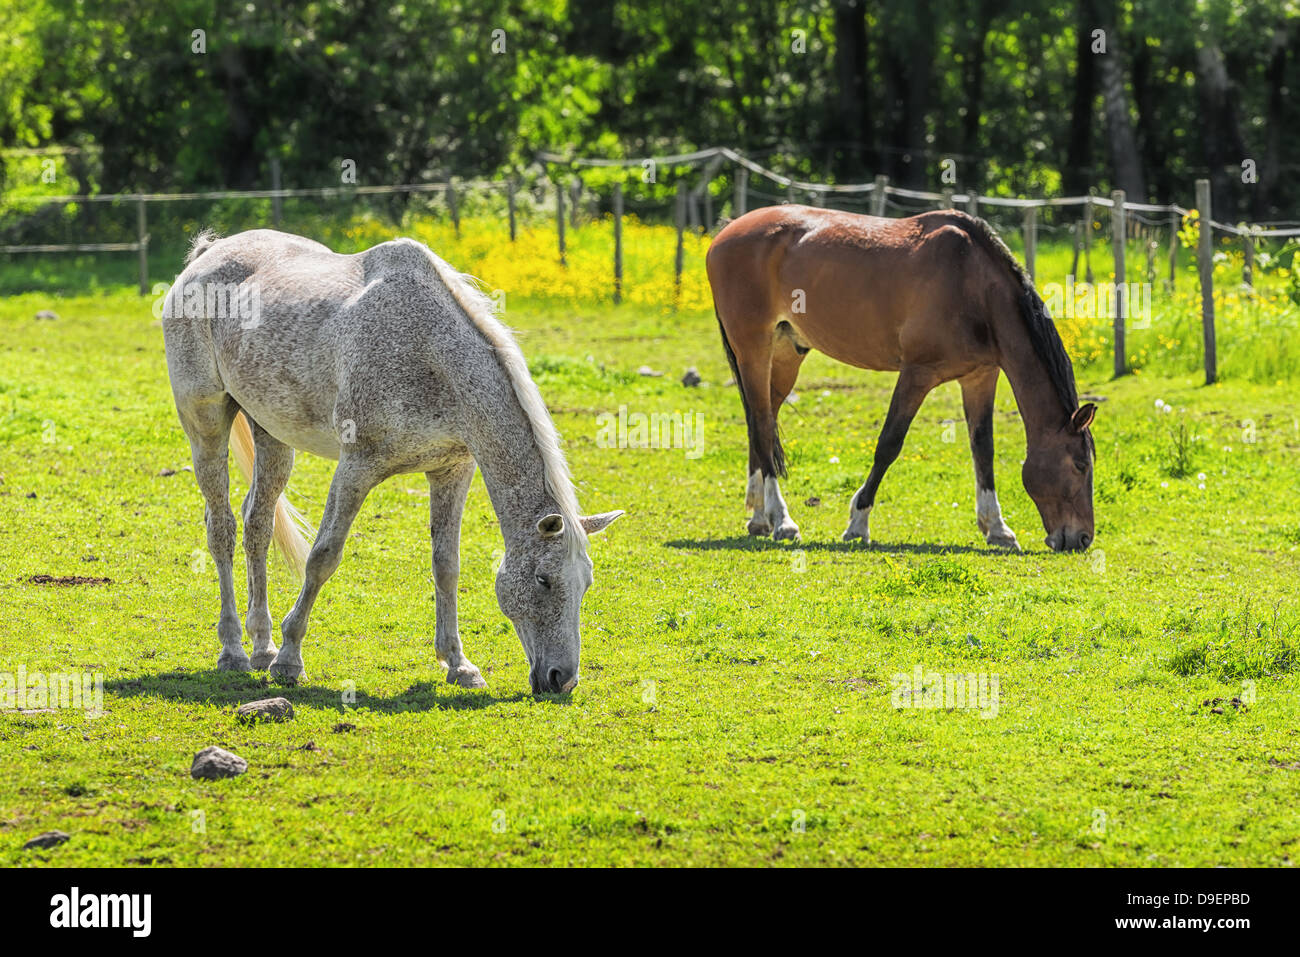 Two horses grazing in a pasture in summer, one brown and one grey/white Stock Photo